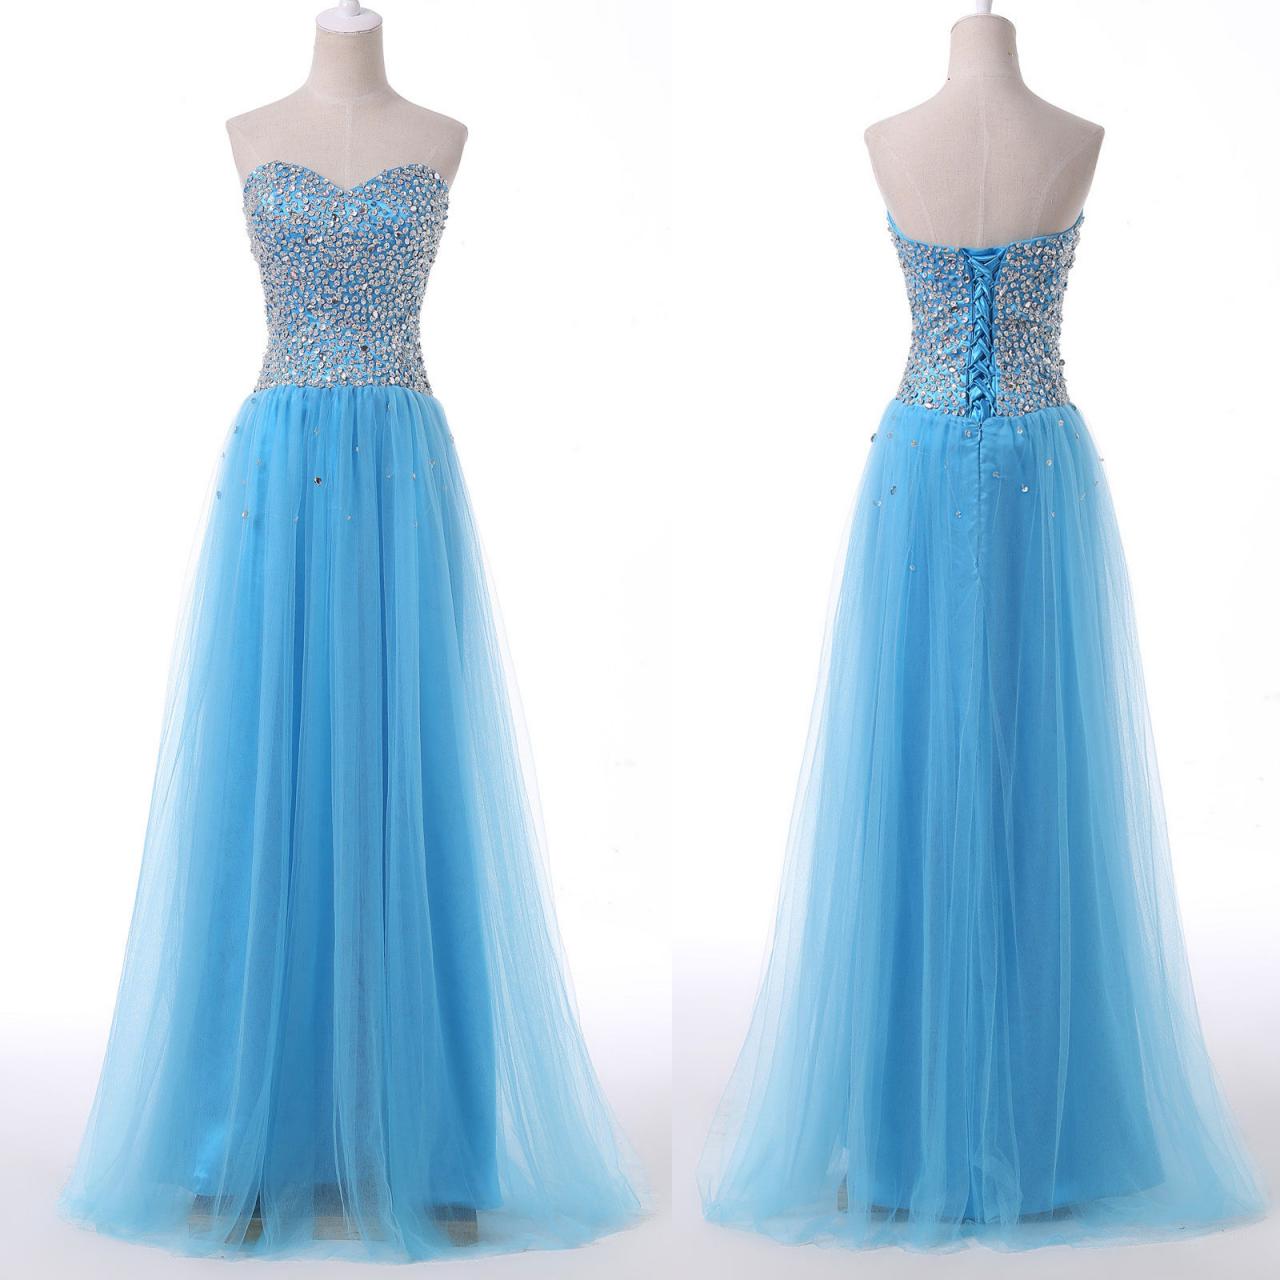  Evening Dresses, Prom Dresses,Party Dresses,Prom Dress, Prom Dresses, Prom Dresses,Prom Dresses,Beautiful Handmade Blue Tulle Long Prom Dress 216, Blue Prom Dresses, Prom Gowns 2016